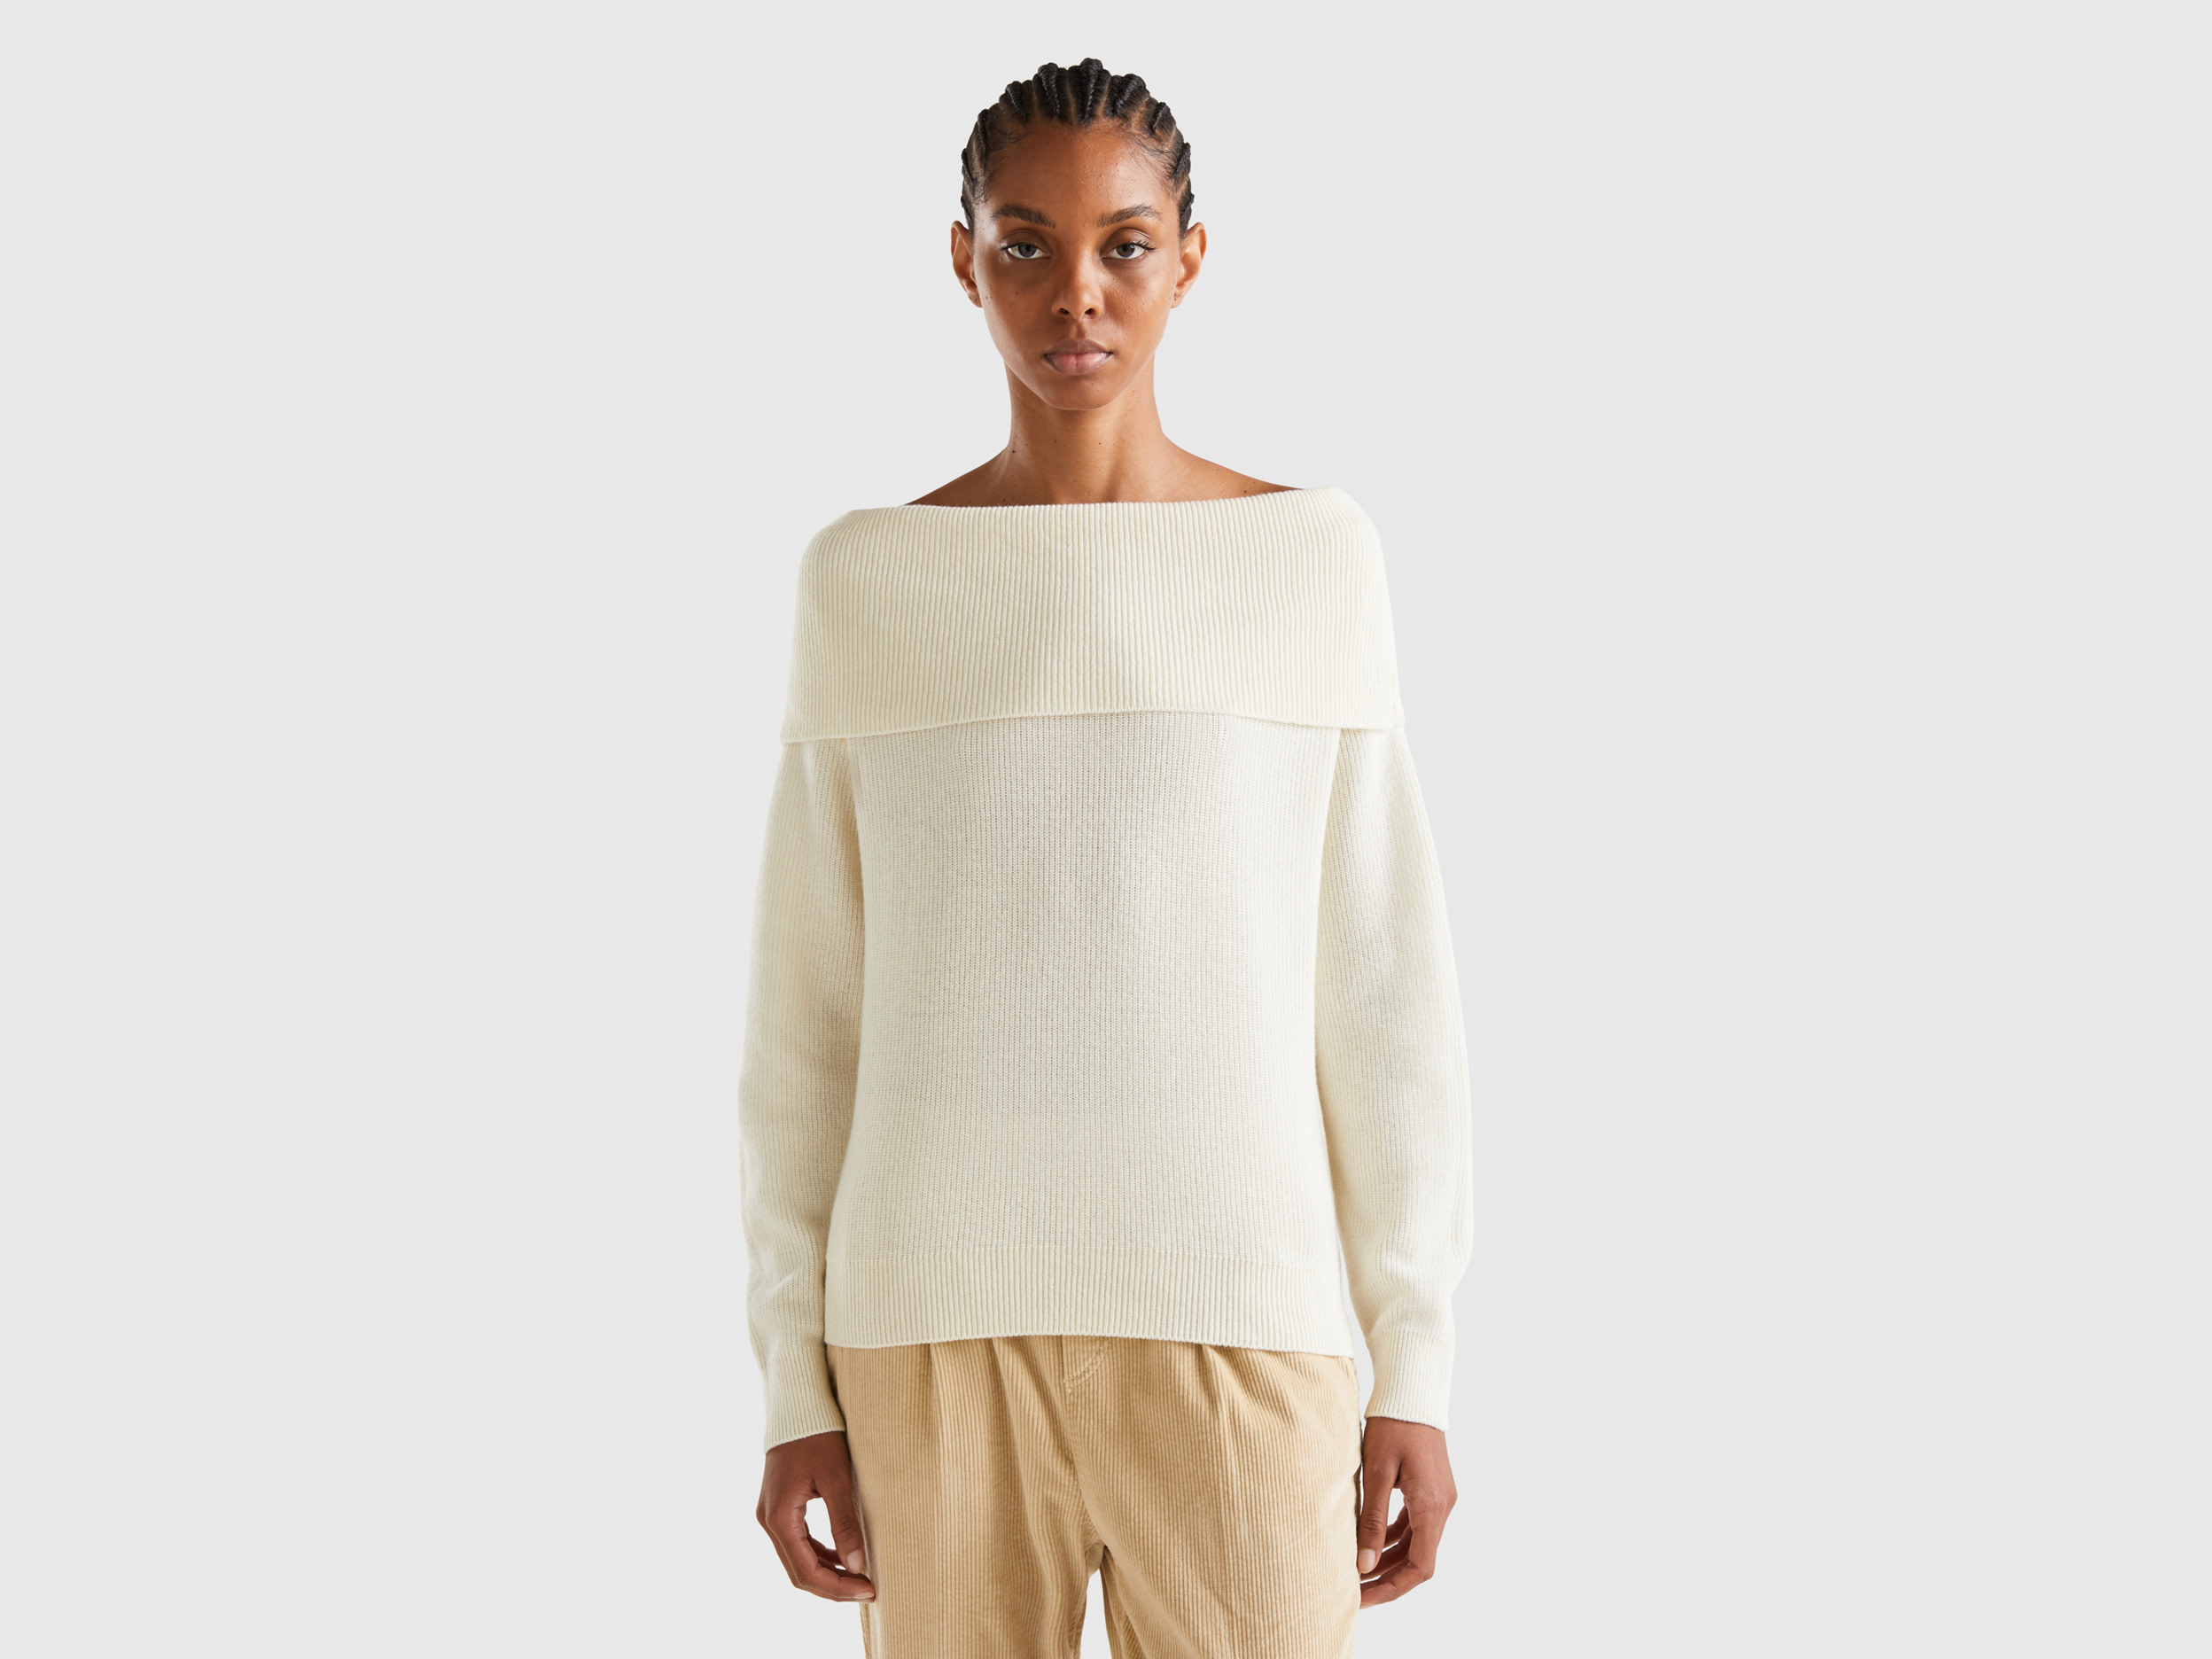 Benetton, Sweater With Bare Shoulders, size L-XL, Creamy White, Women